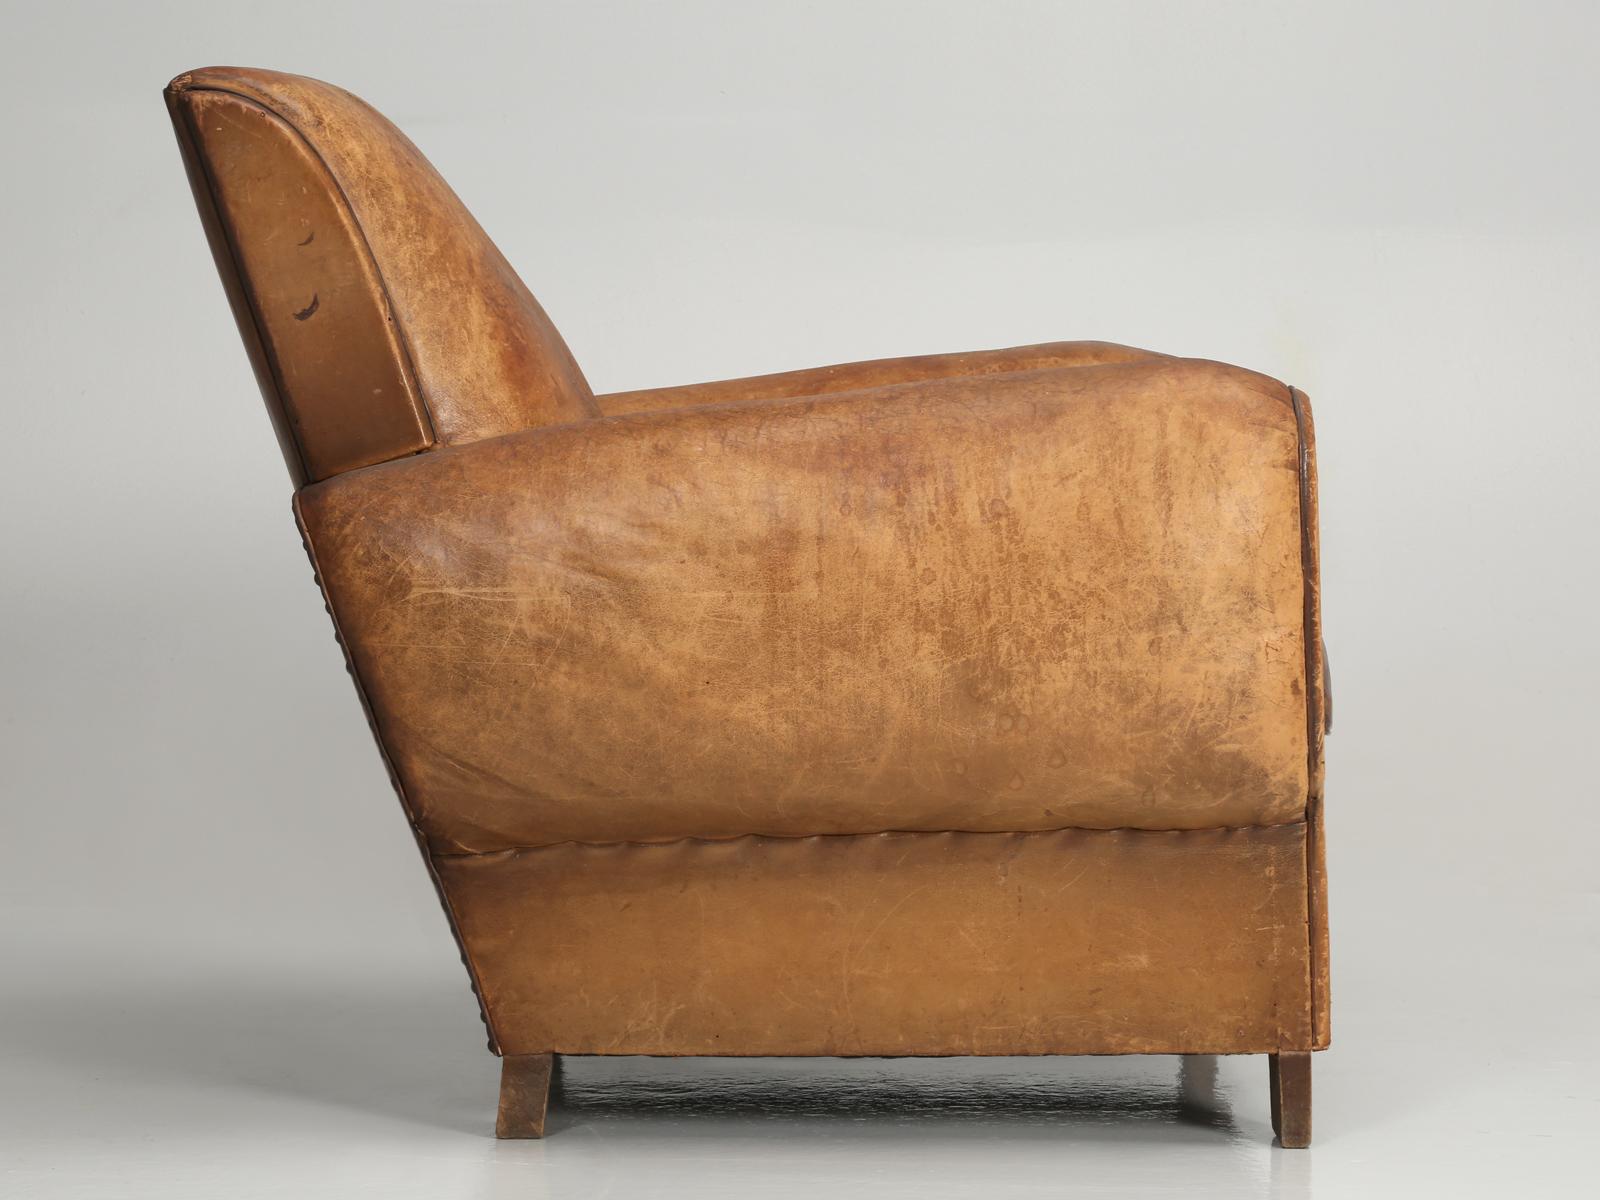 French Art Deco leather club chair, that our in house upholstery department has carefully disassembled and rebuilt as necessary from the bottom up and made it look as though we never touched it. This is a single French leather club chair that was